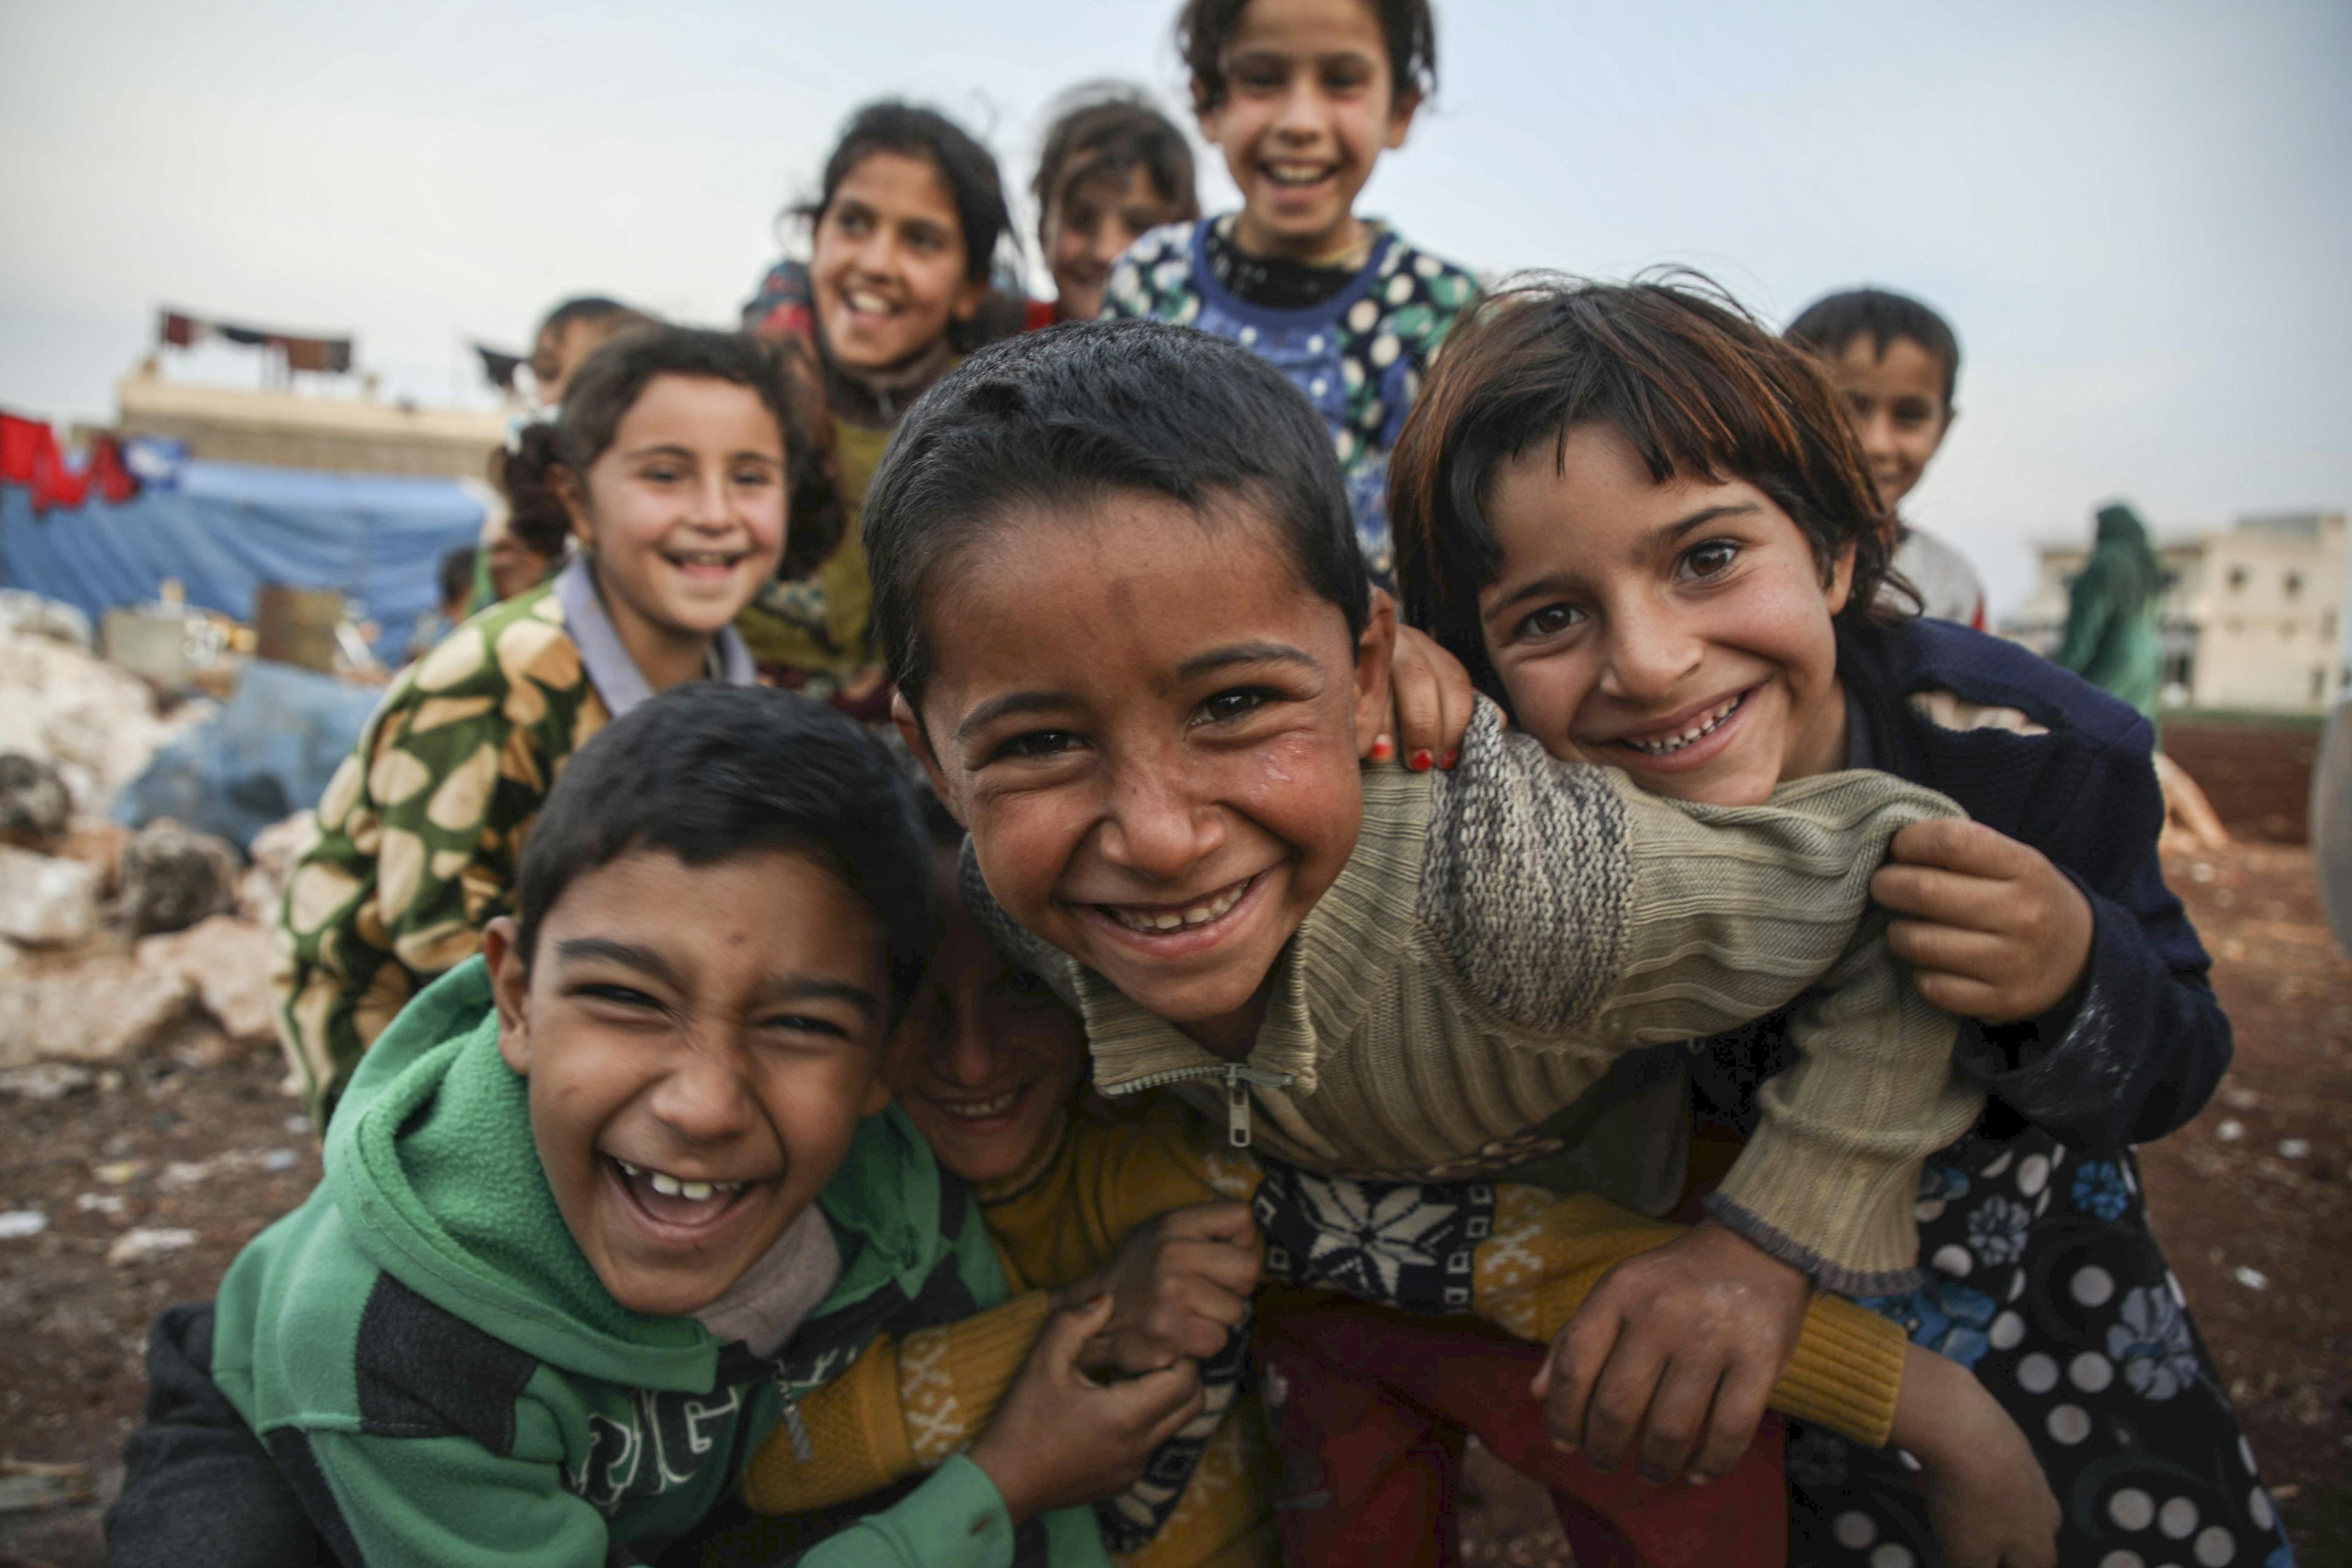 A group of children laugh and smile at the camera in Syria